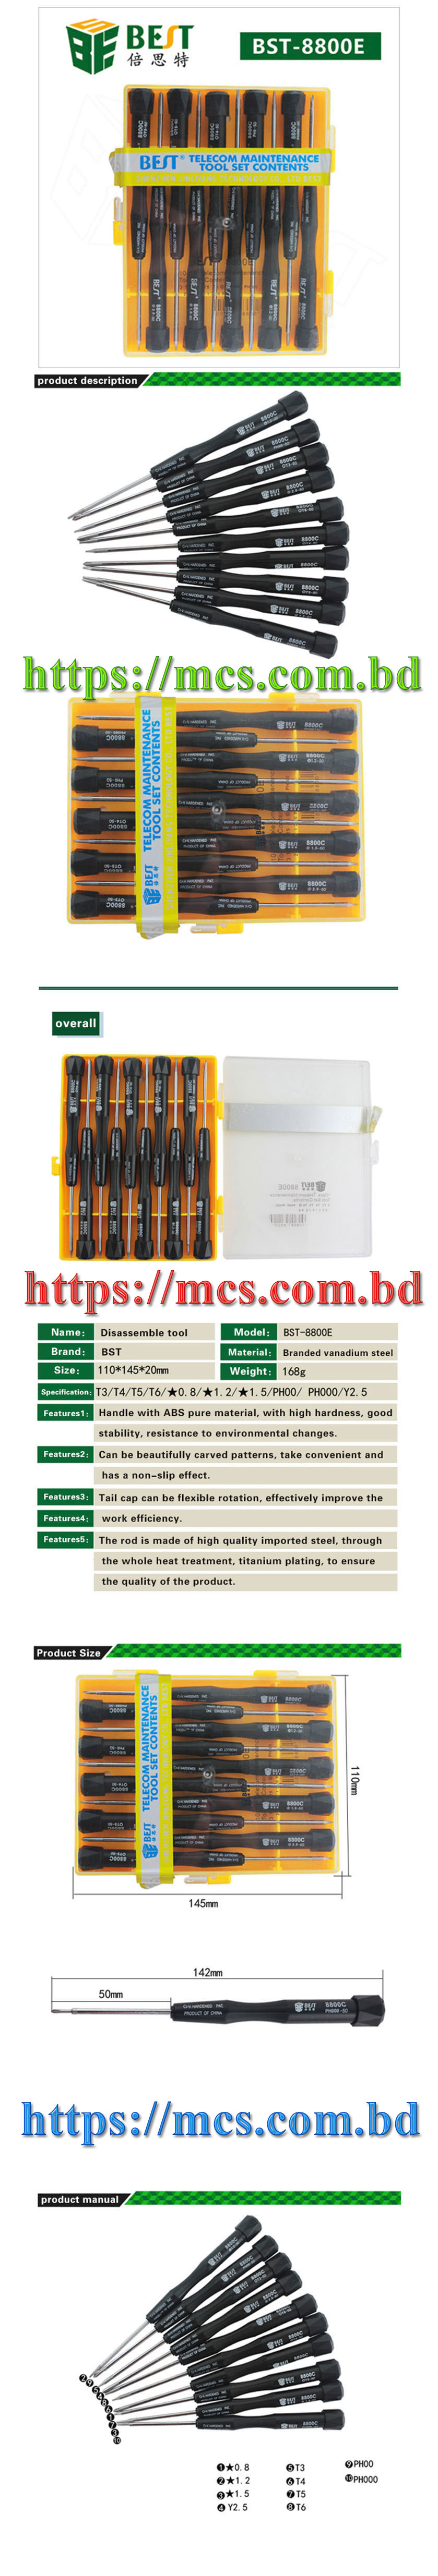 BEST BST ­8800E ScrewDriver For Electronicst